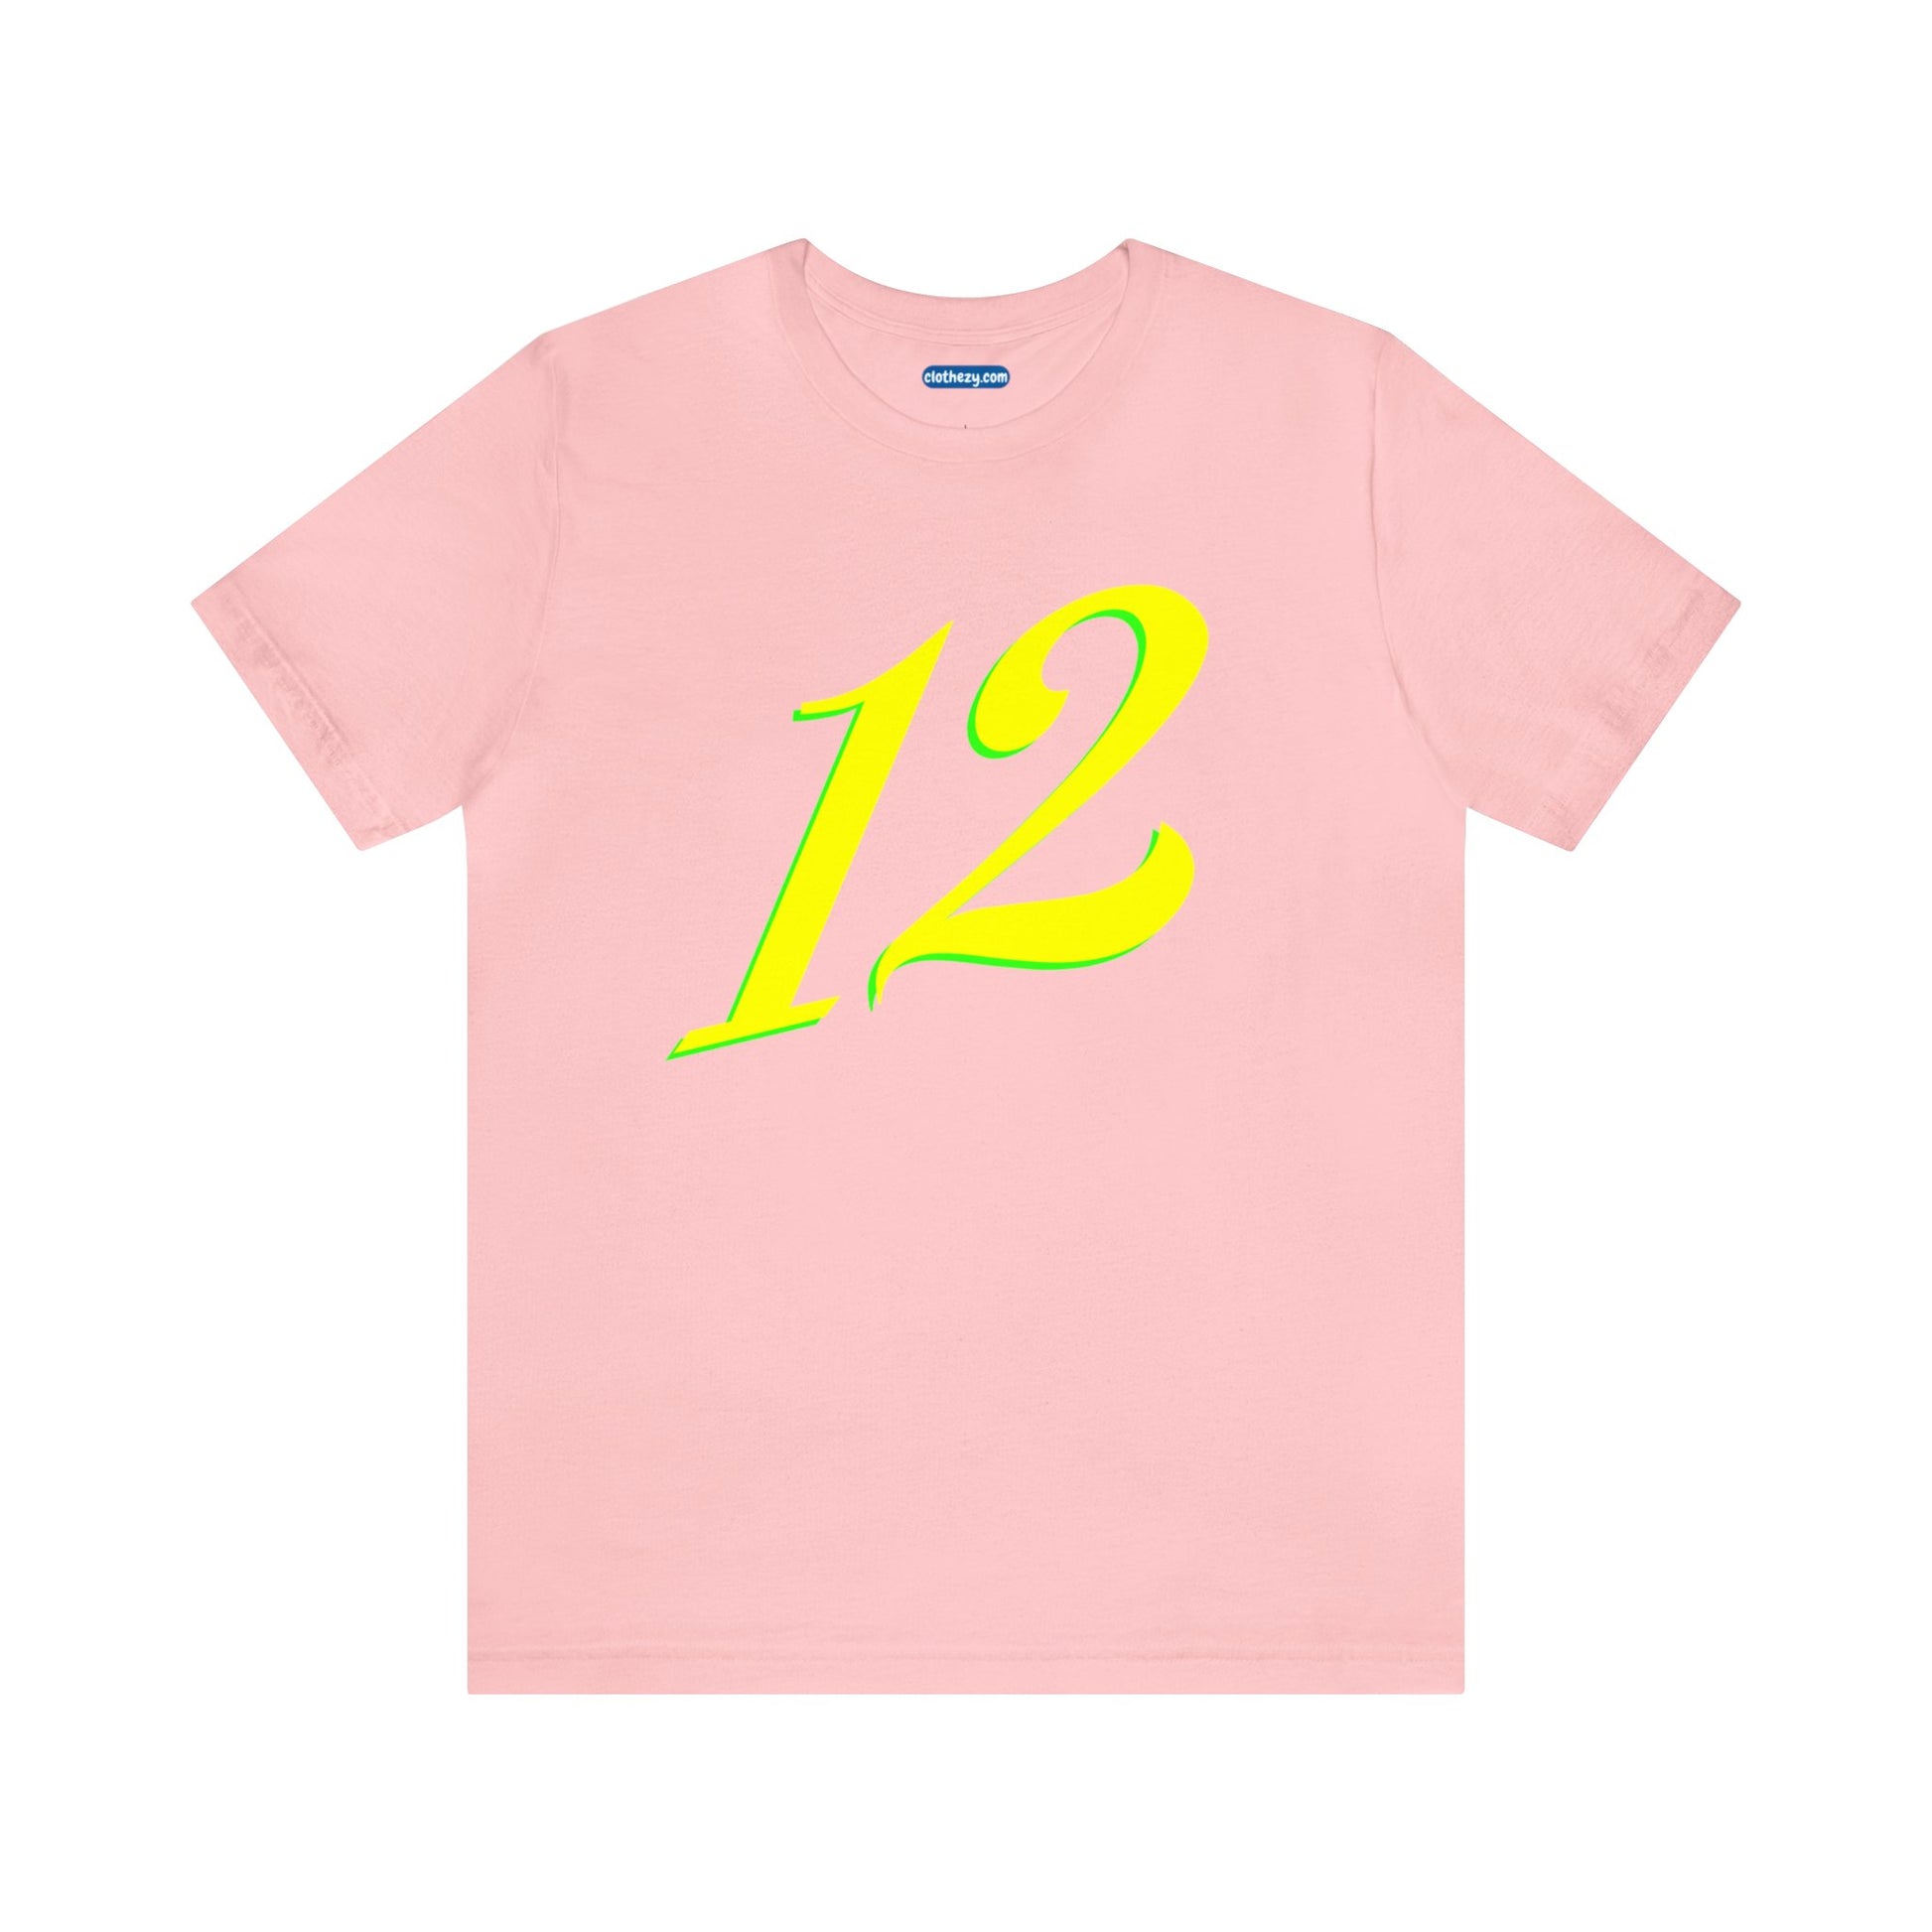 Number 12 Design - Soft Cotton Tee for birthdays and celebrations, Gift for friends and family, Multiple Options by clothezy.com in Red Size Small - Buy Now